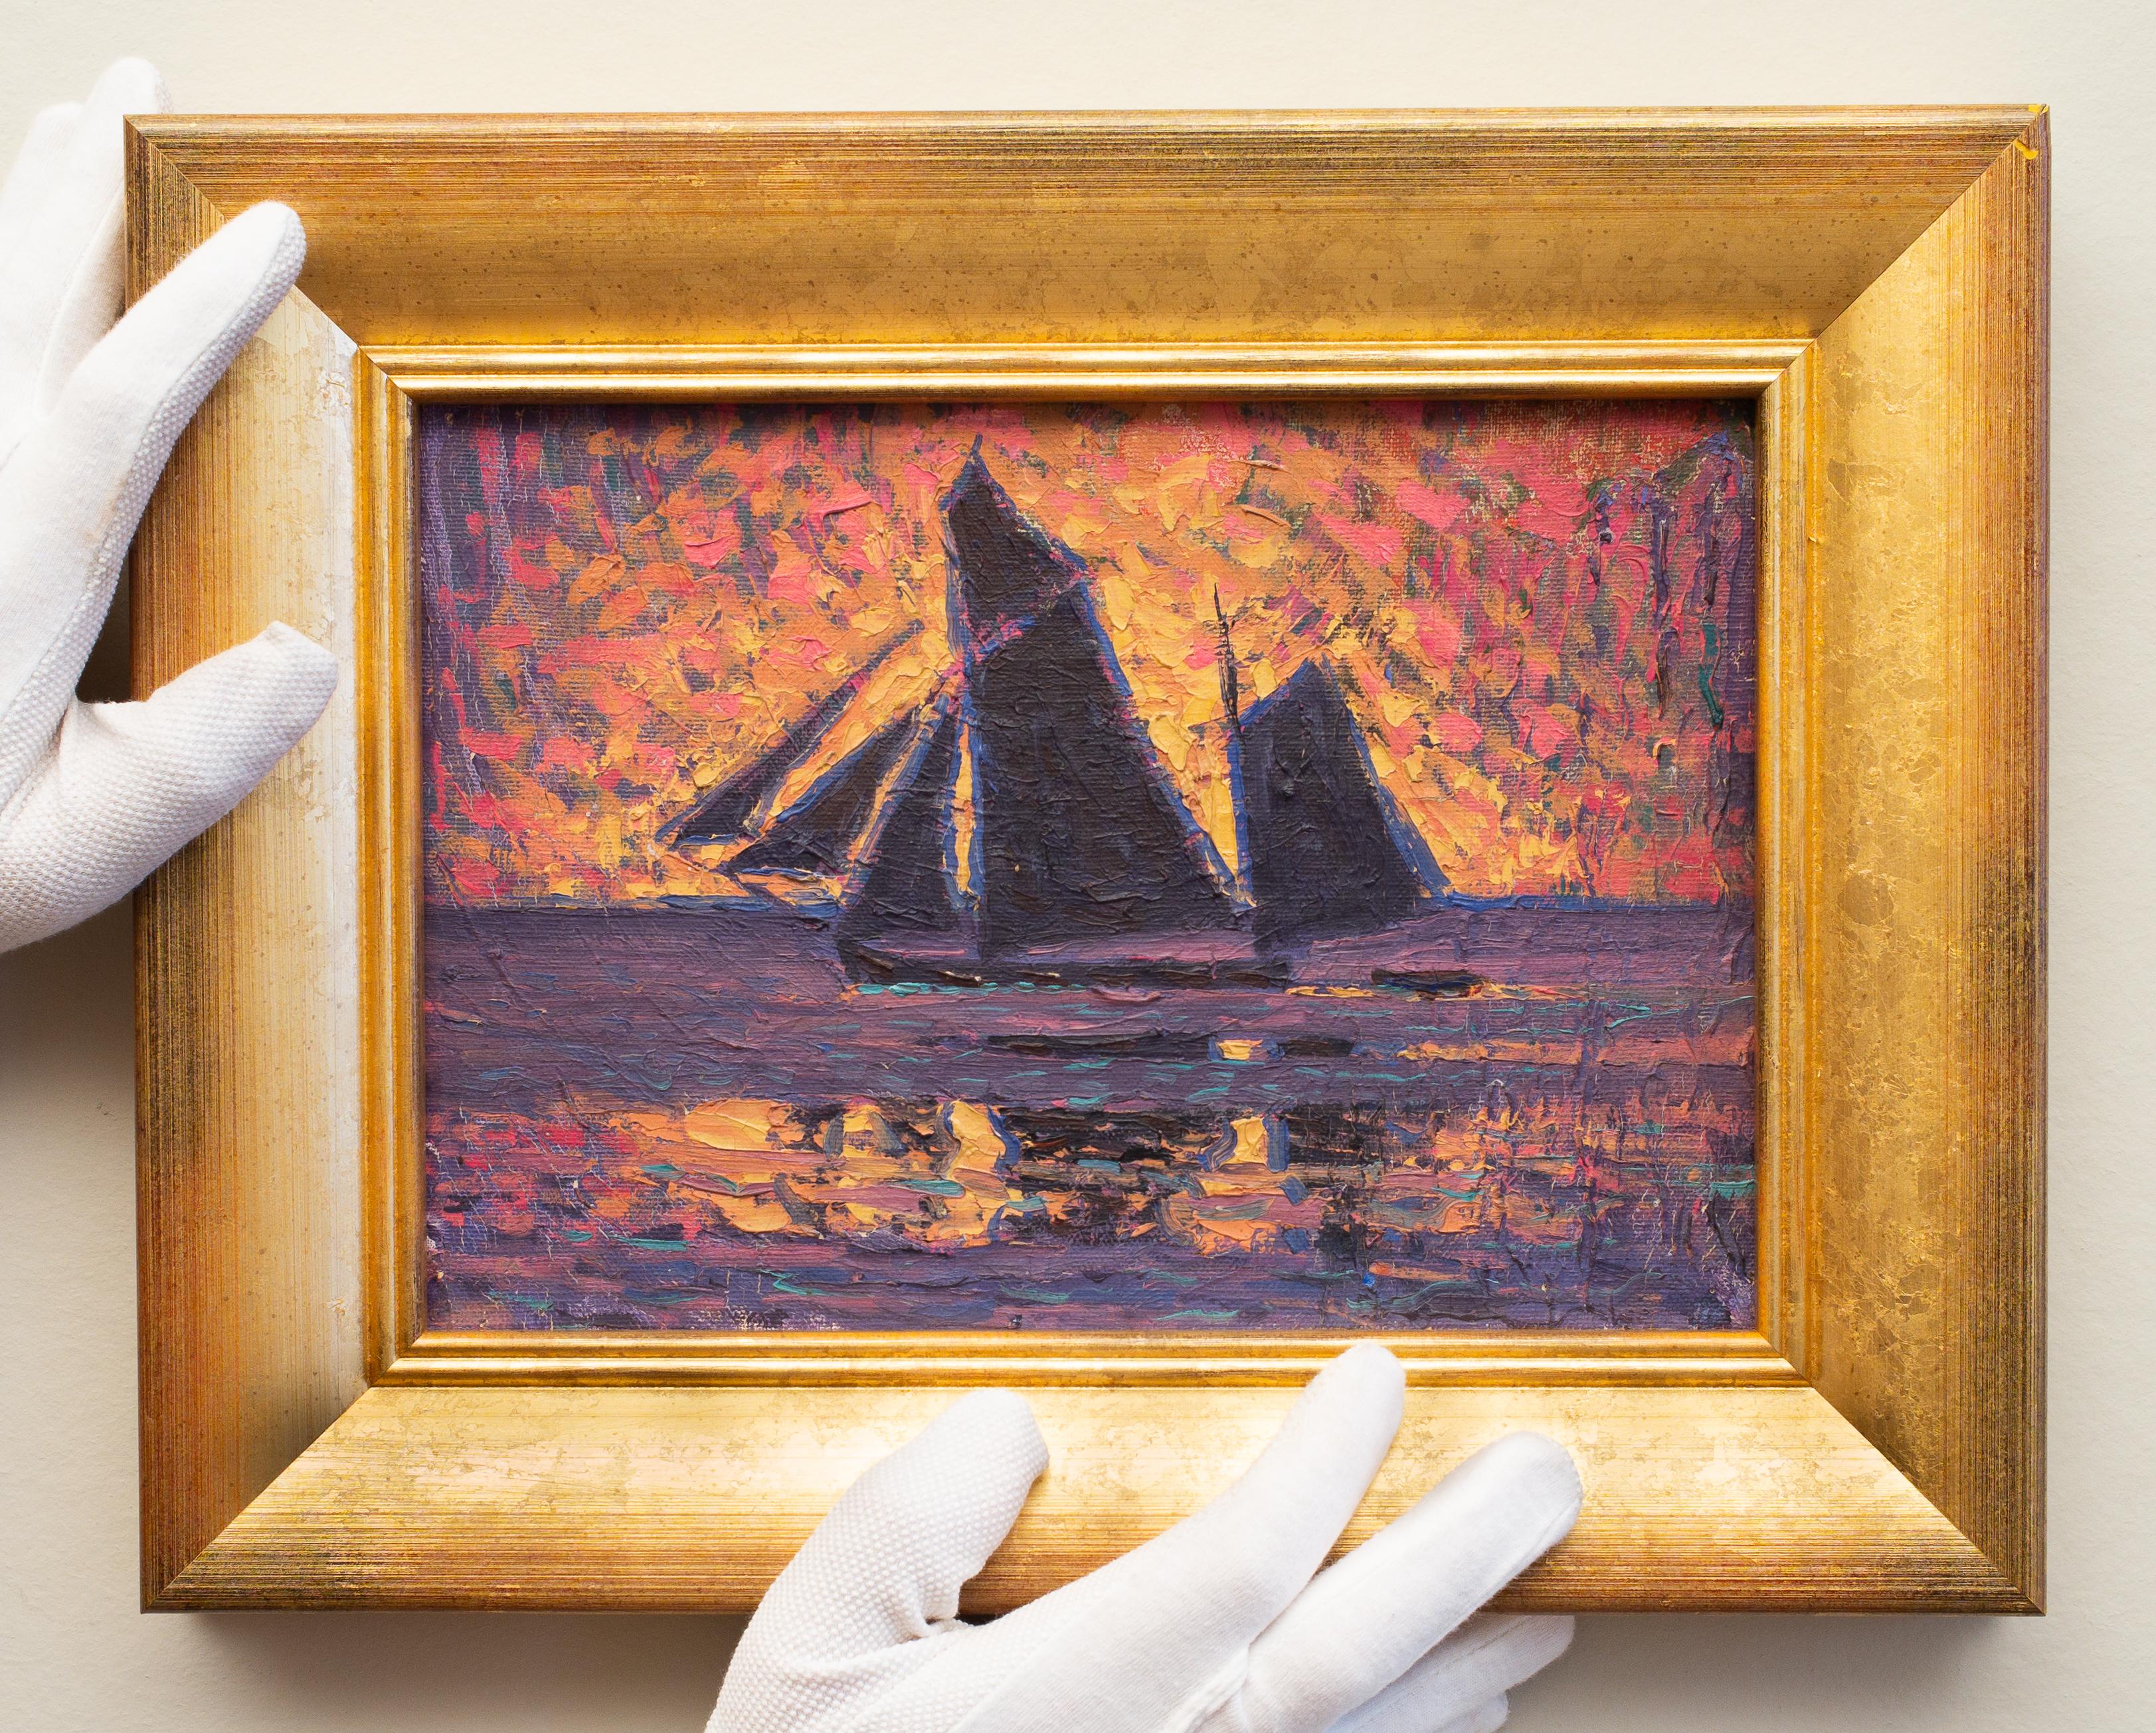 A Sailboat by Swedish Artist Olof Thunman, Oil Painting, c. 1920s 1